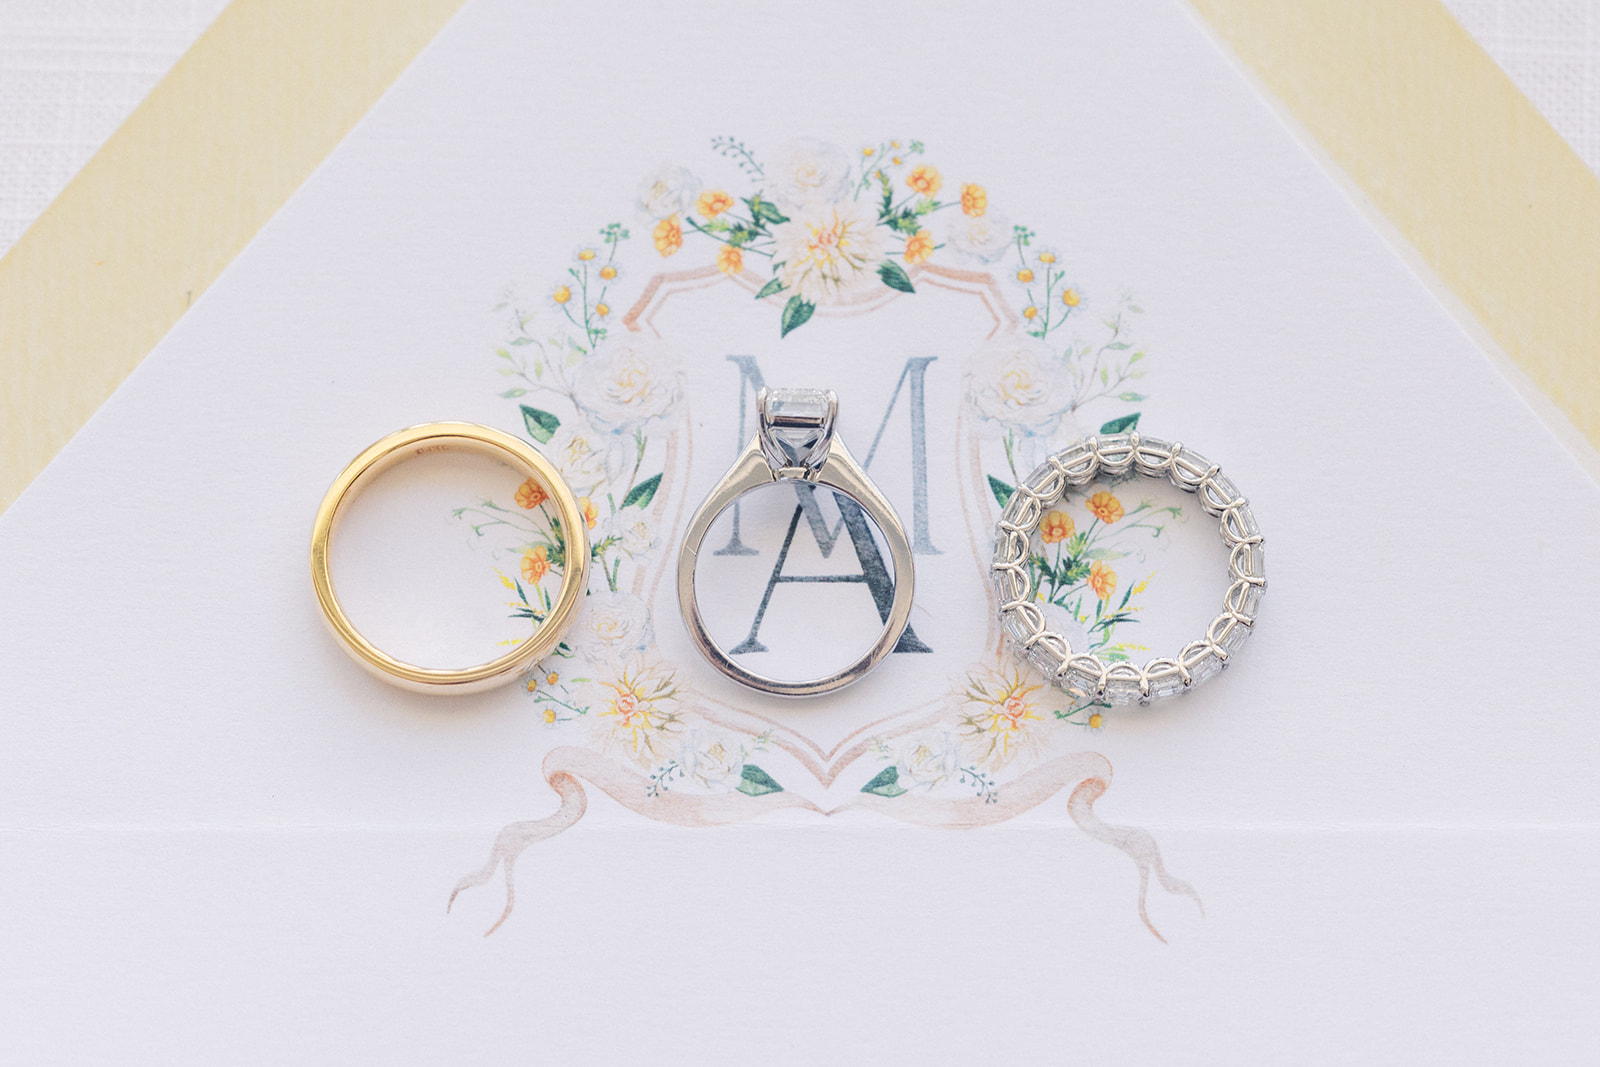 Wedding bands and an engagement ring sit together on an invitation